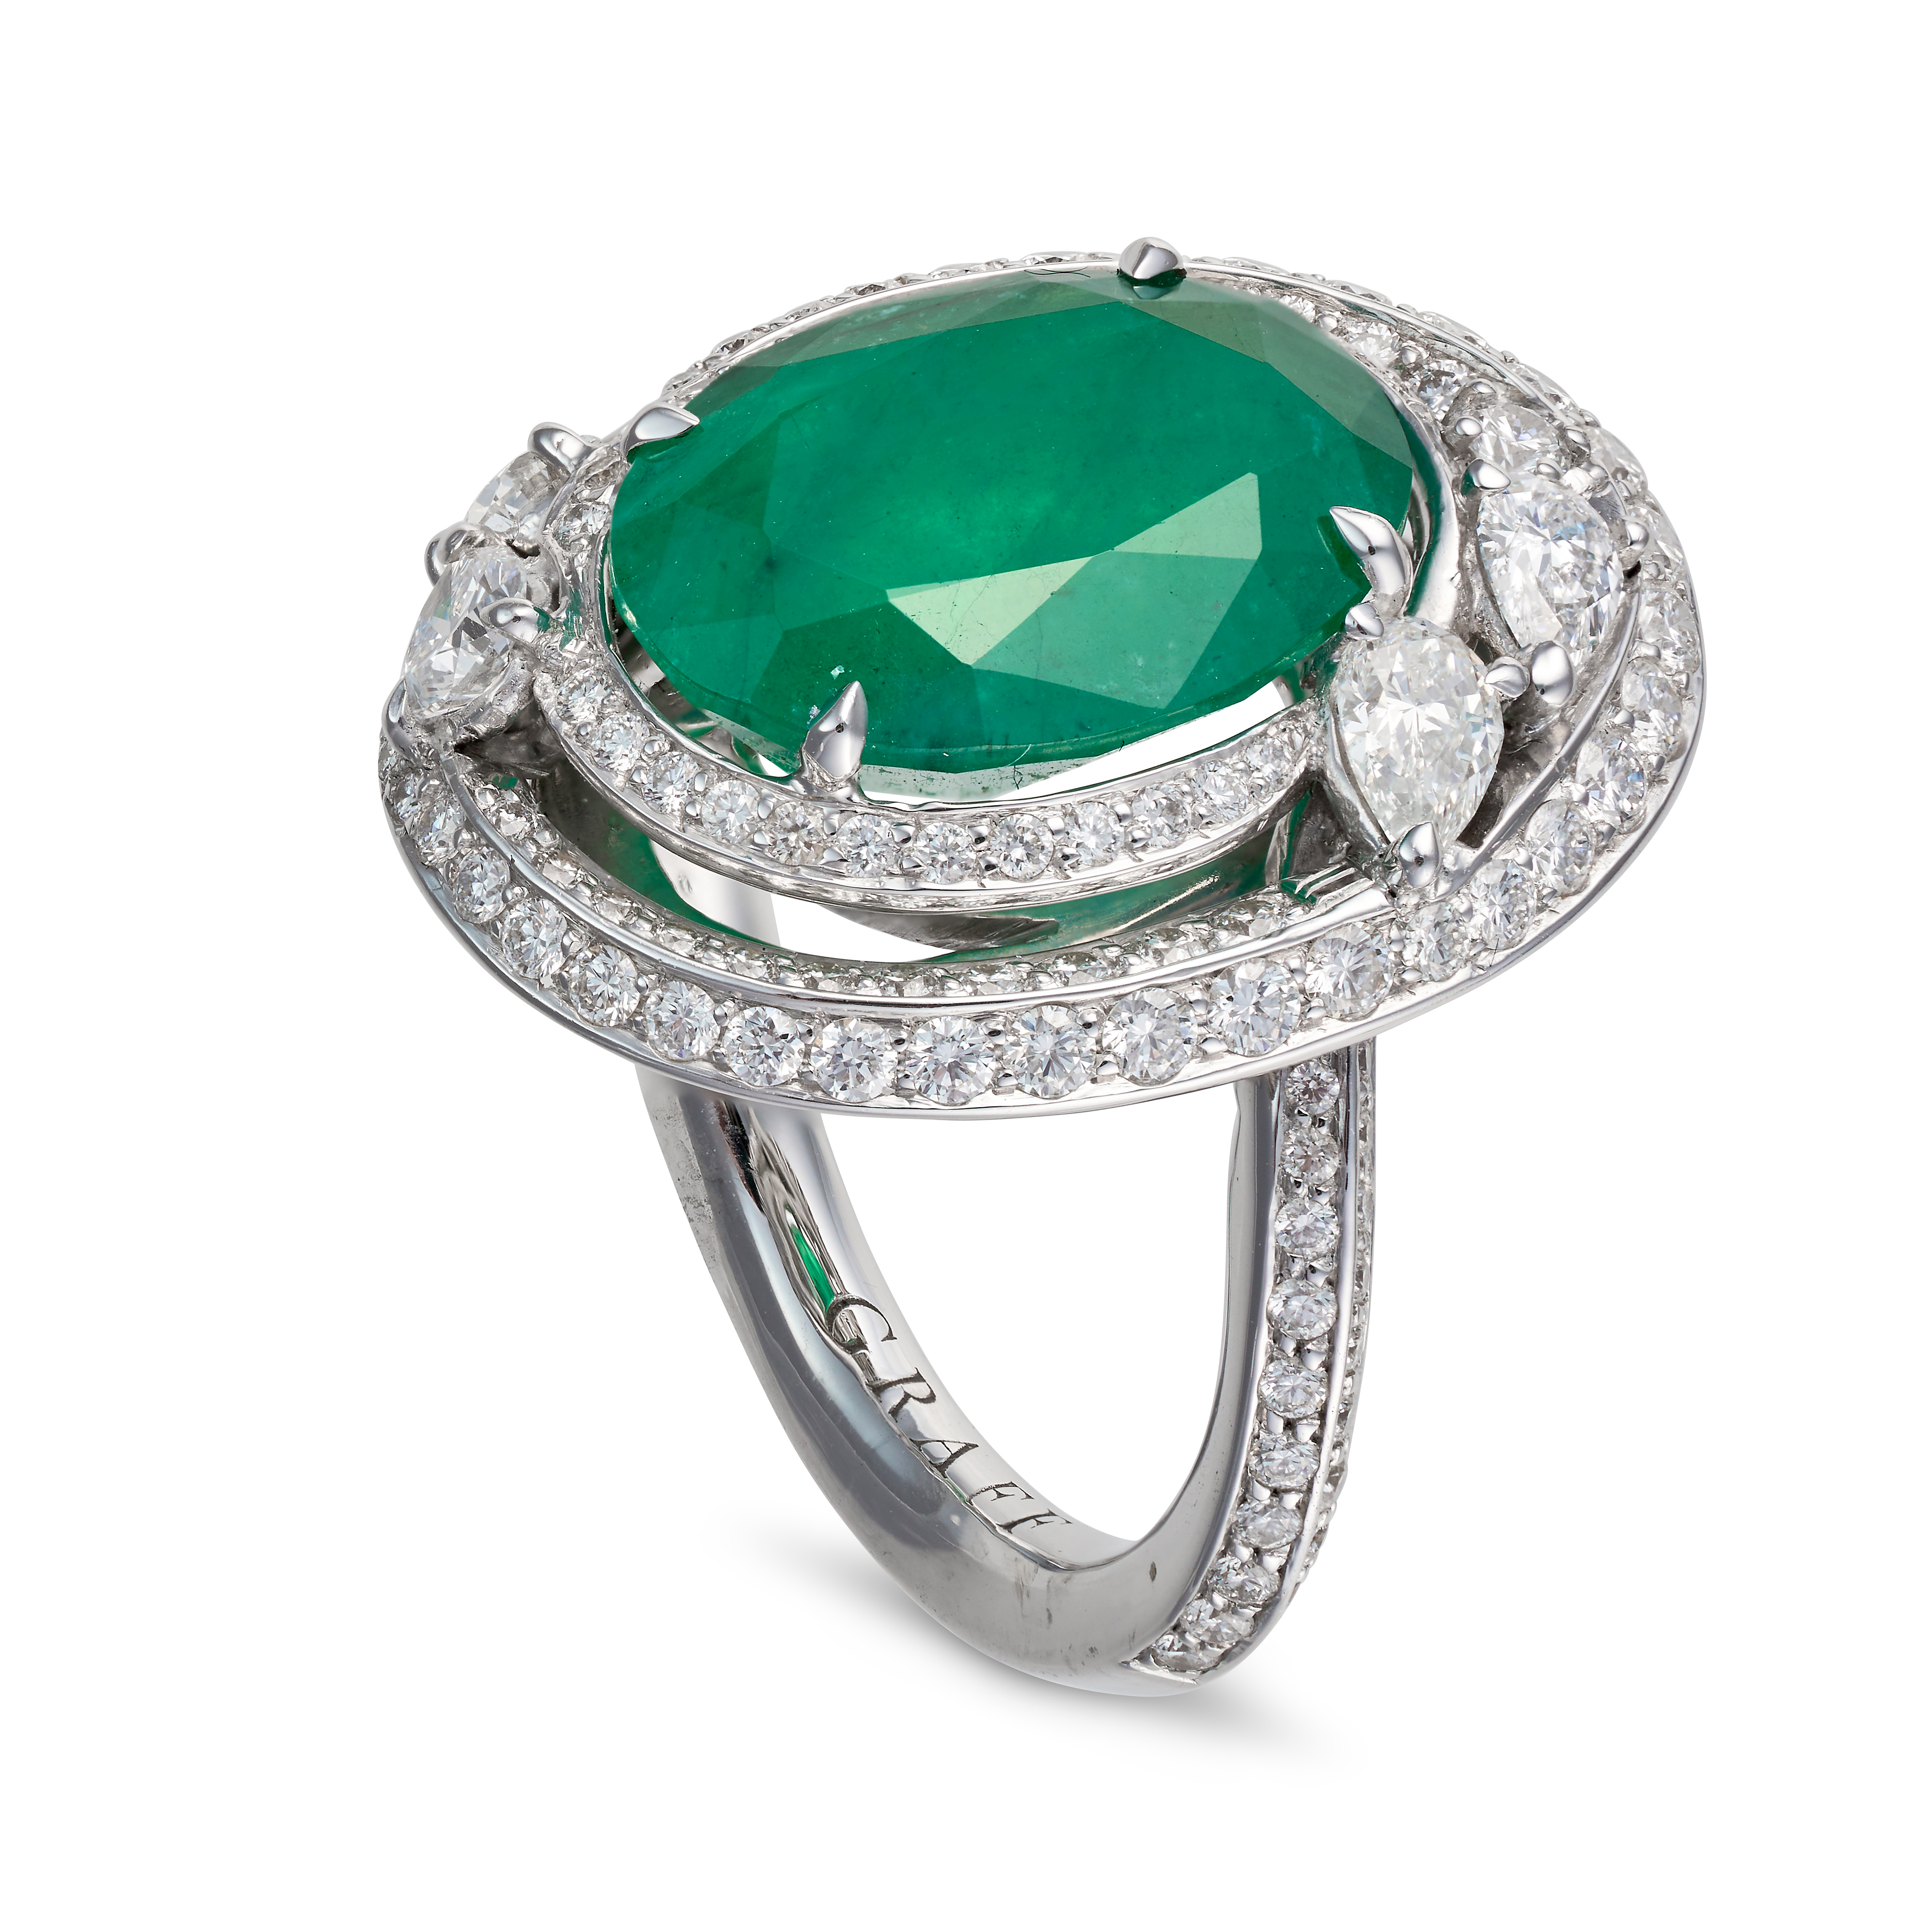 GRAFF, AN EMERALD AND DIAMOND DRESS RING set with an oval cut emerald of 7.18 carats, in a border... - Image 2 of 2